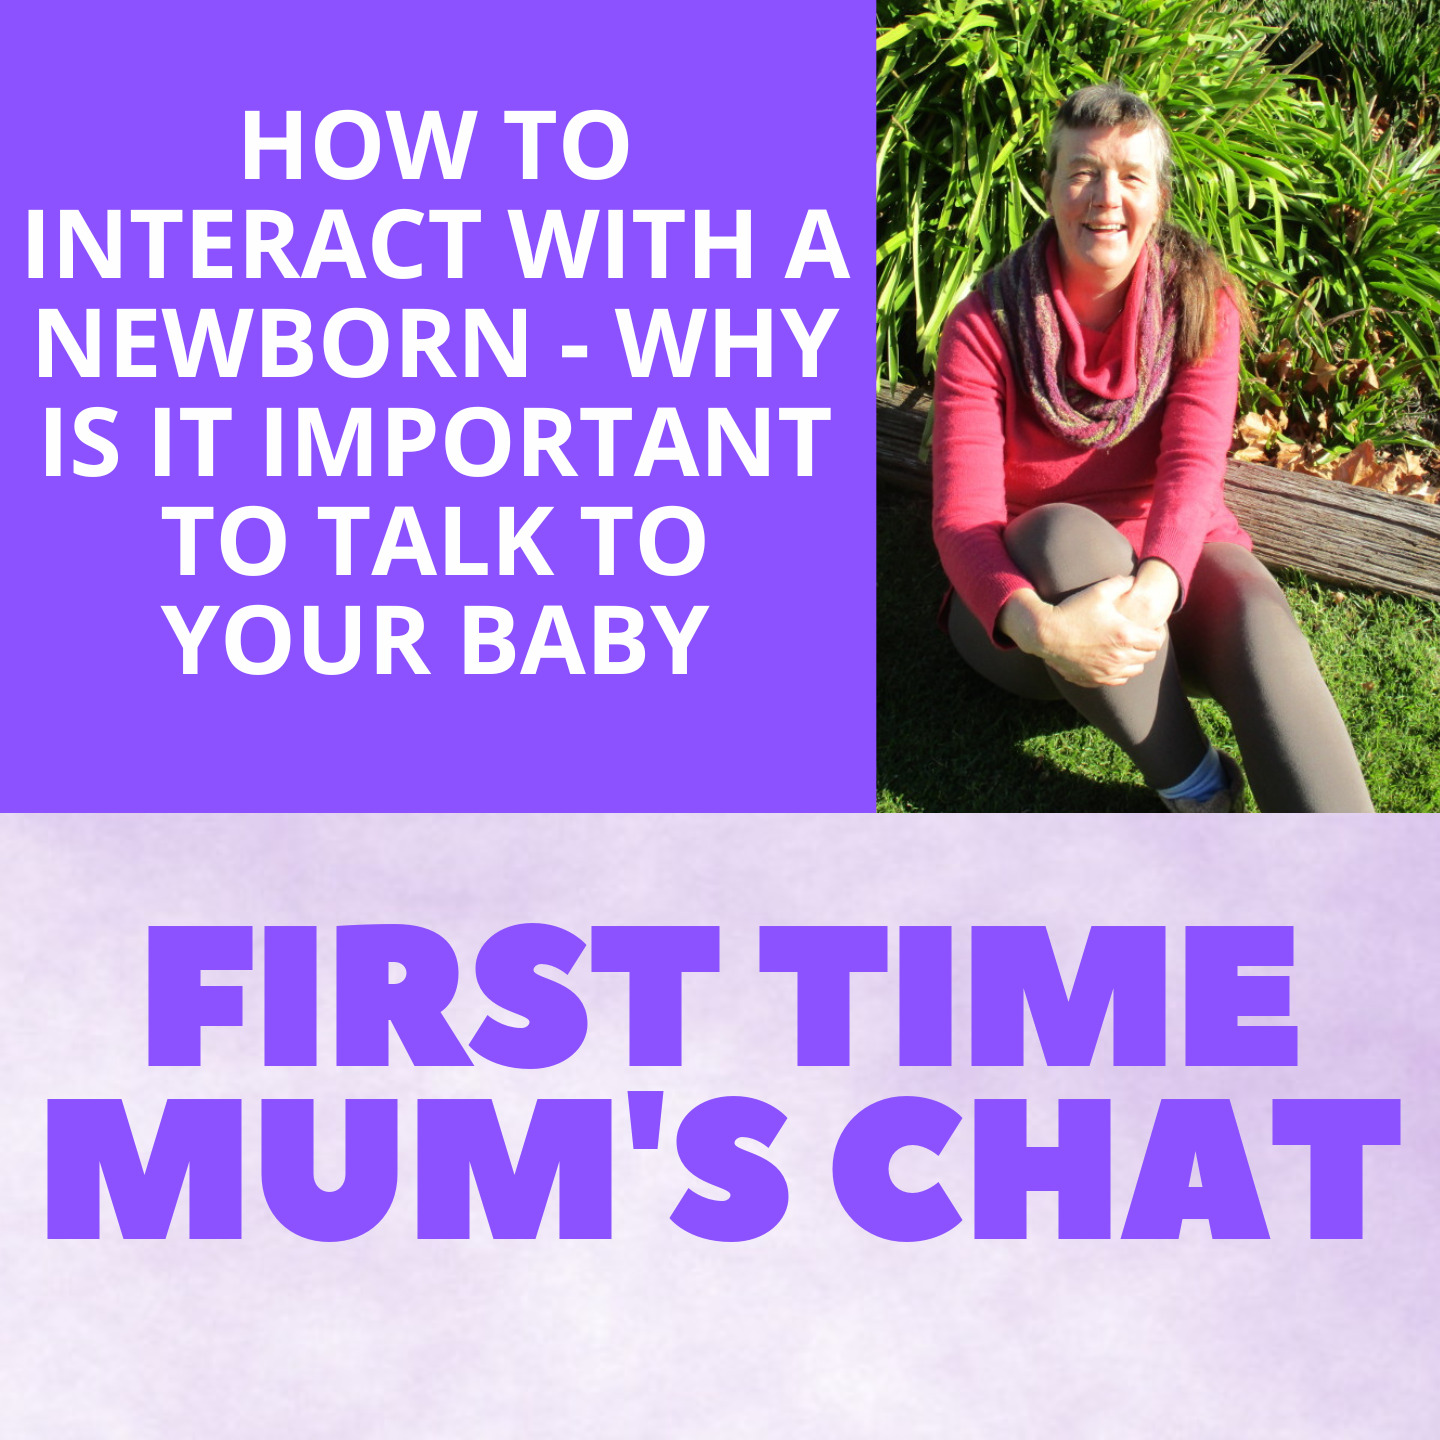 How to Interact With a Newborn - Why is it Important to Talk to Your Baby